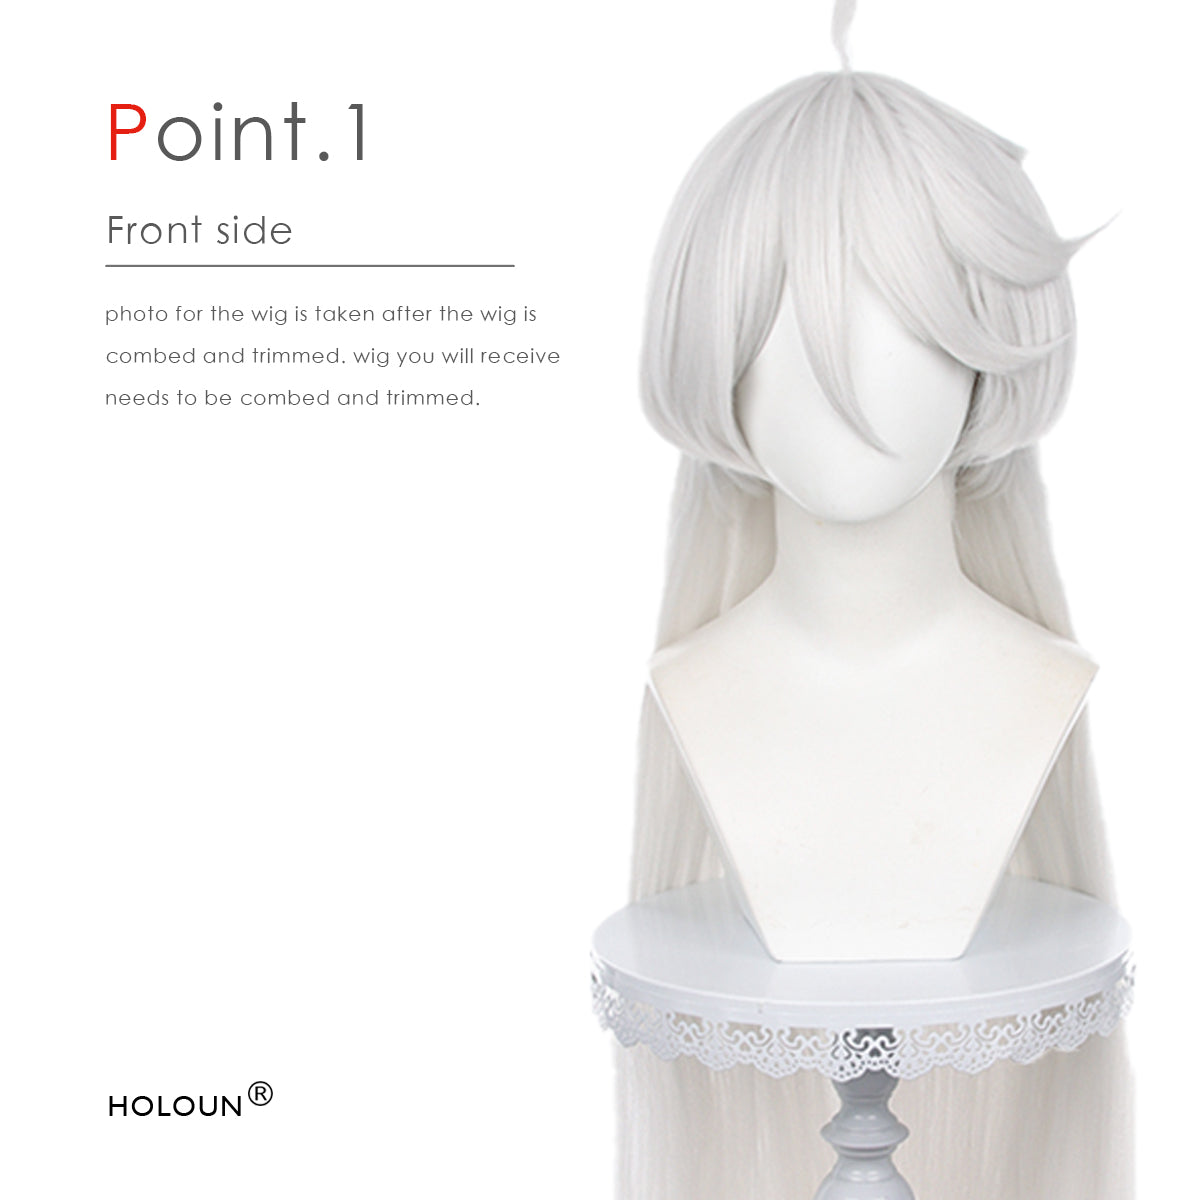 HOLOUN Miorine Rembran Cosplay Wig Heat Resistant White Long Hair The Witch From Mercury